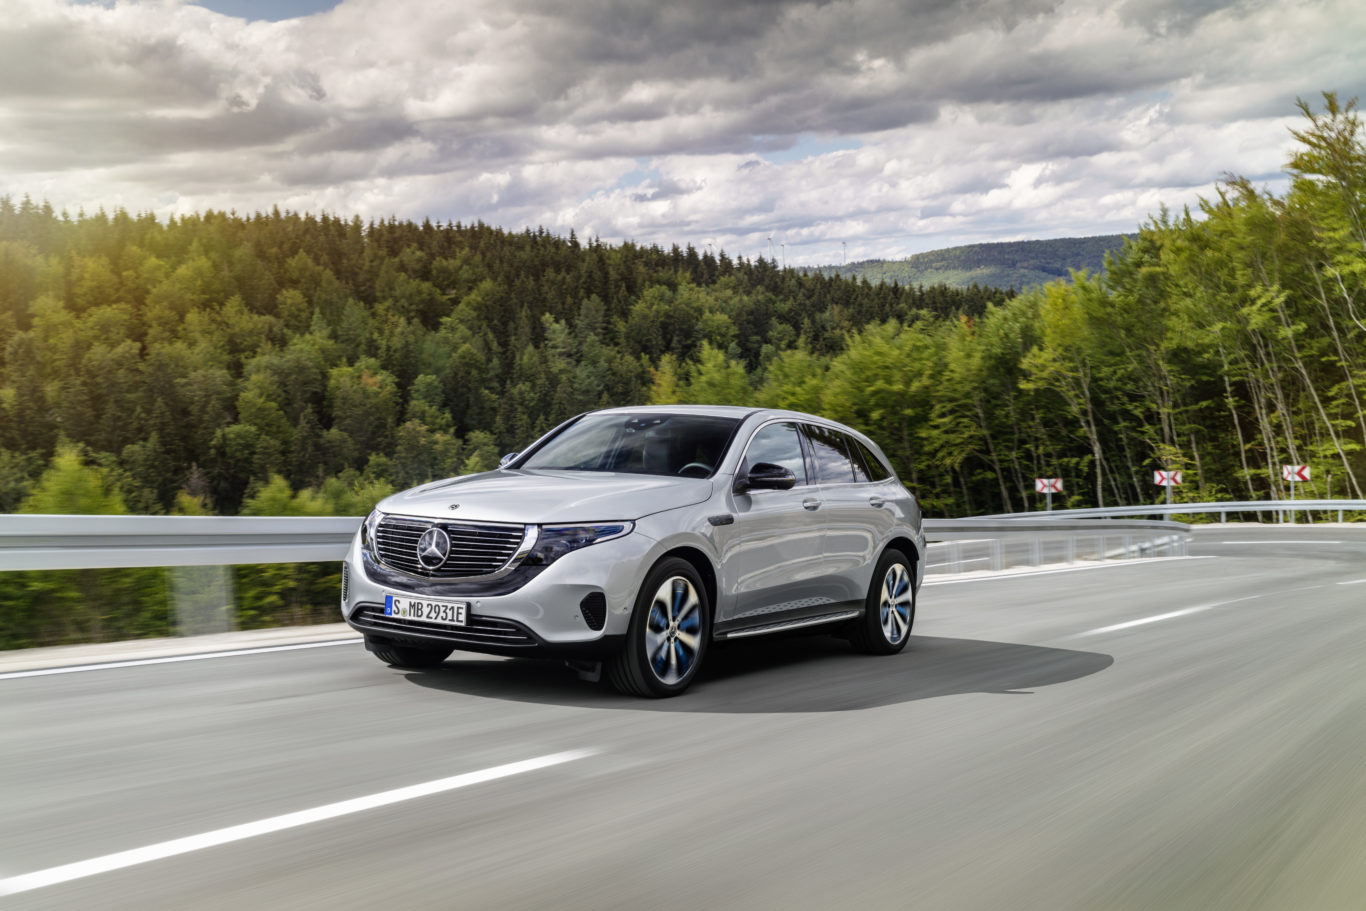 The EQC is one of the latest models to join the electric car ranks